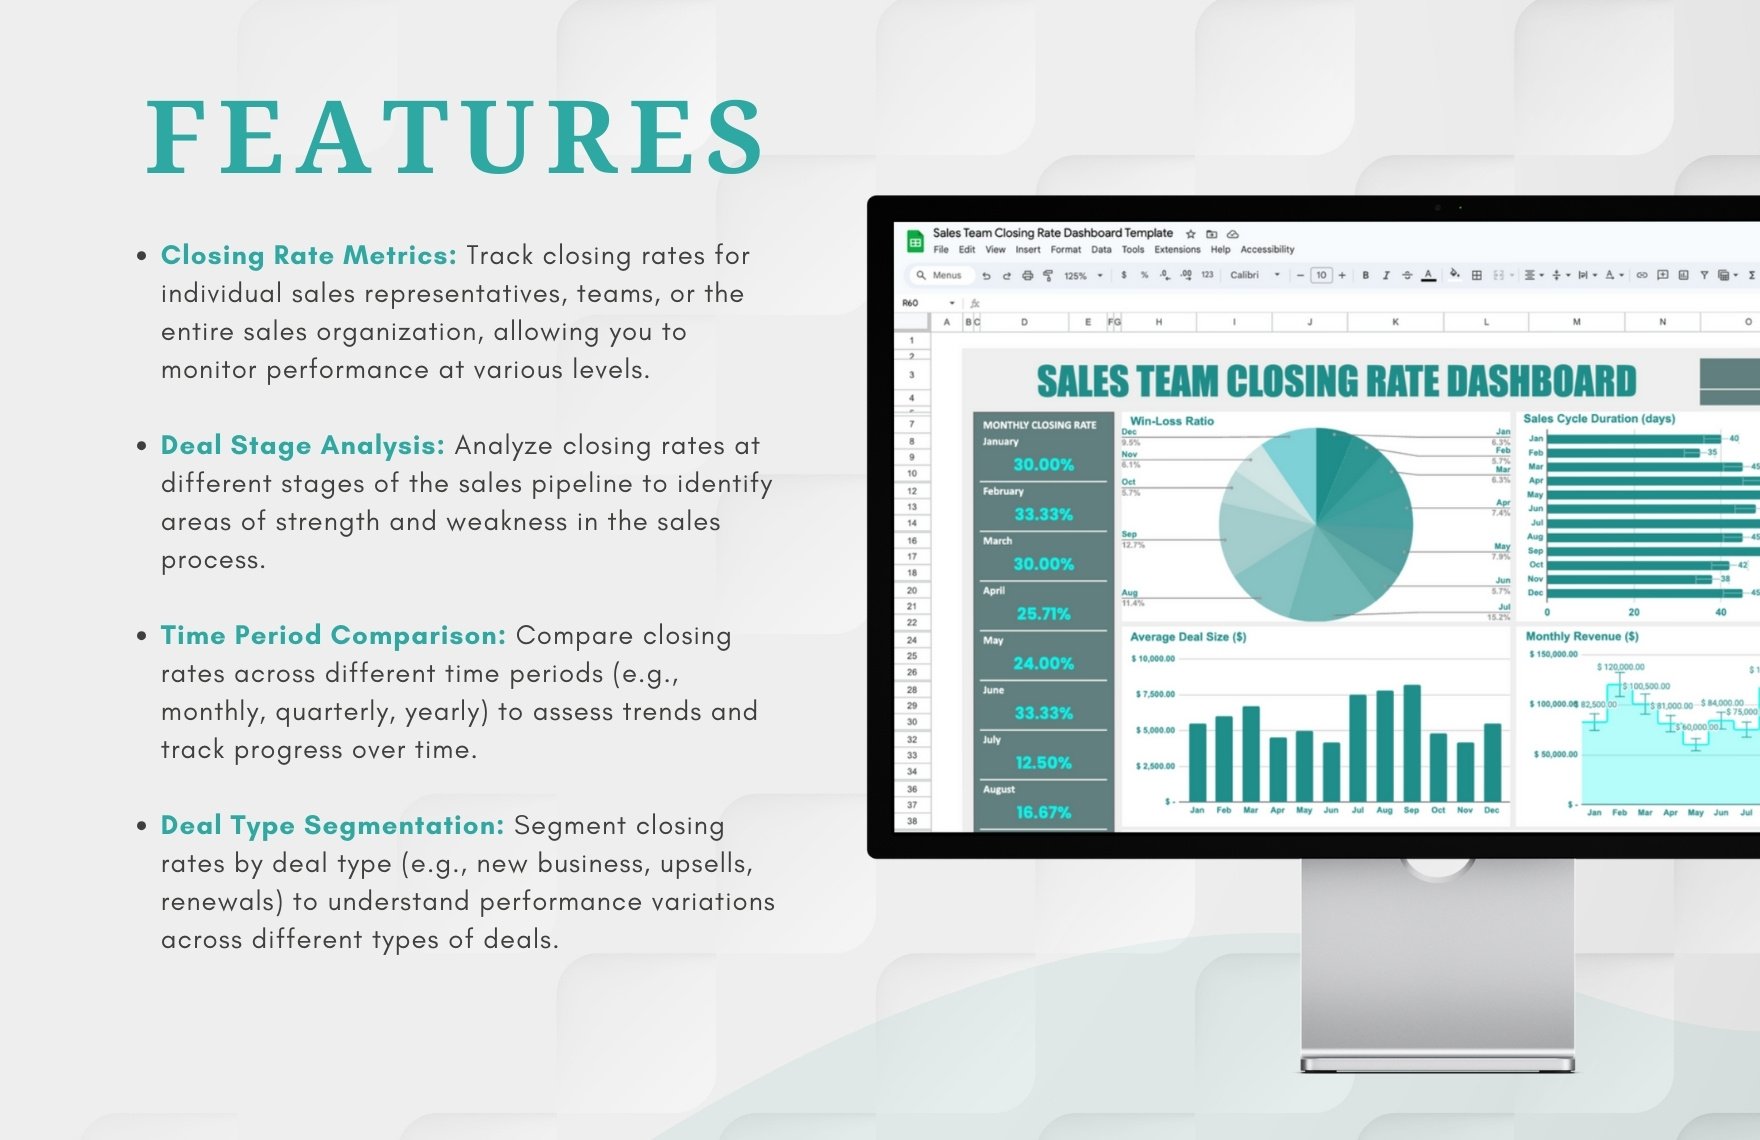 Sales Team Closing Rate Dashboard Template